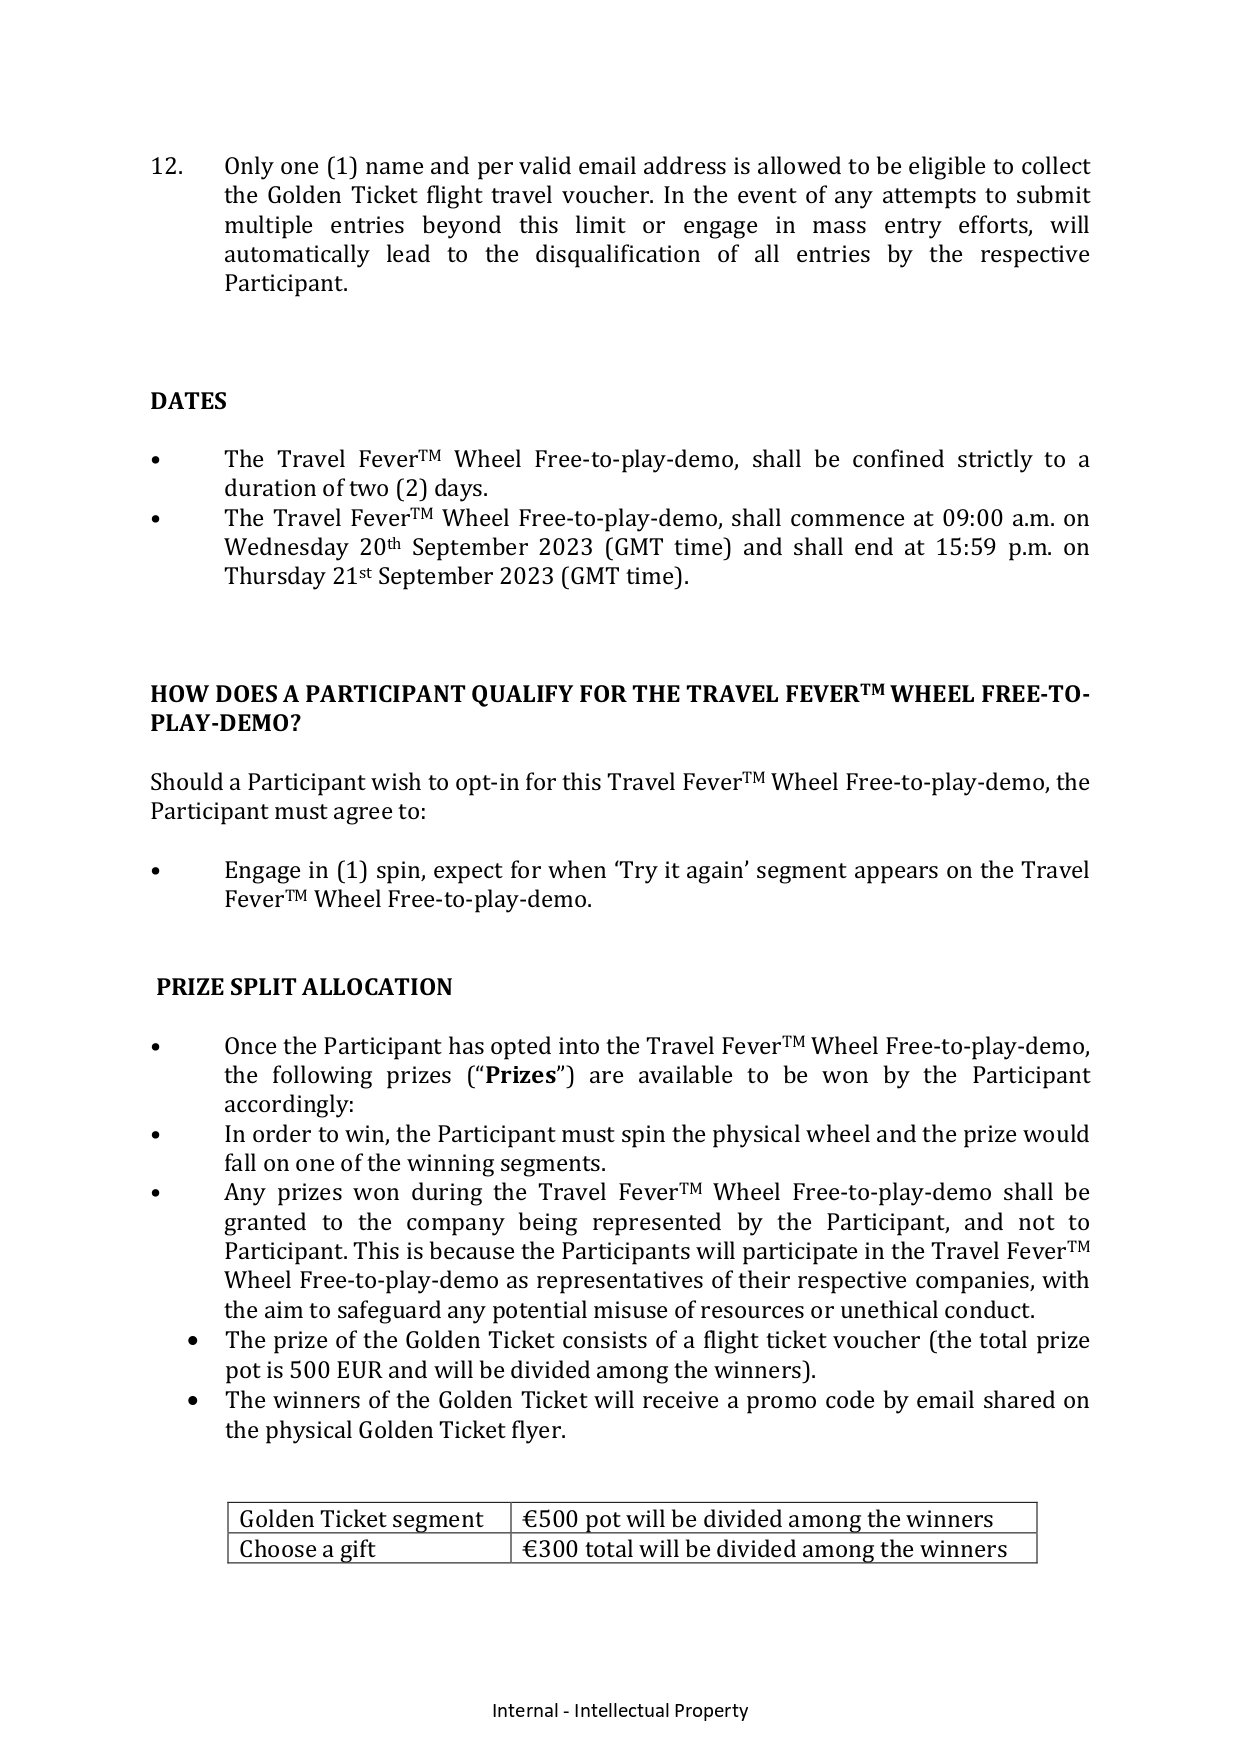 Screenshot of the terms and conditions of an OnAir tournament, held in SBC Barcelona, 2023.